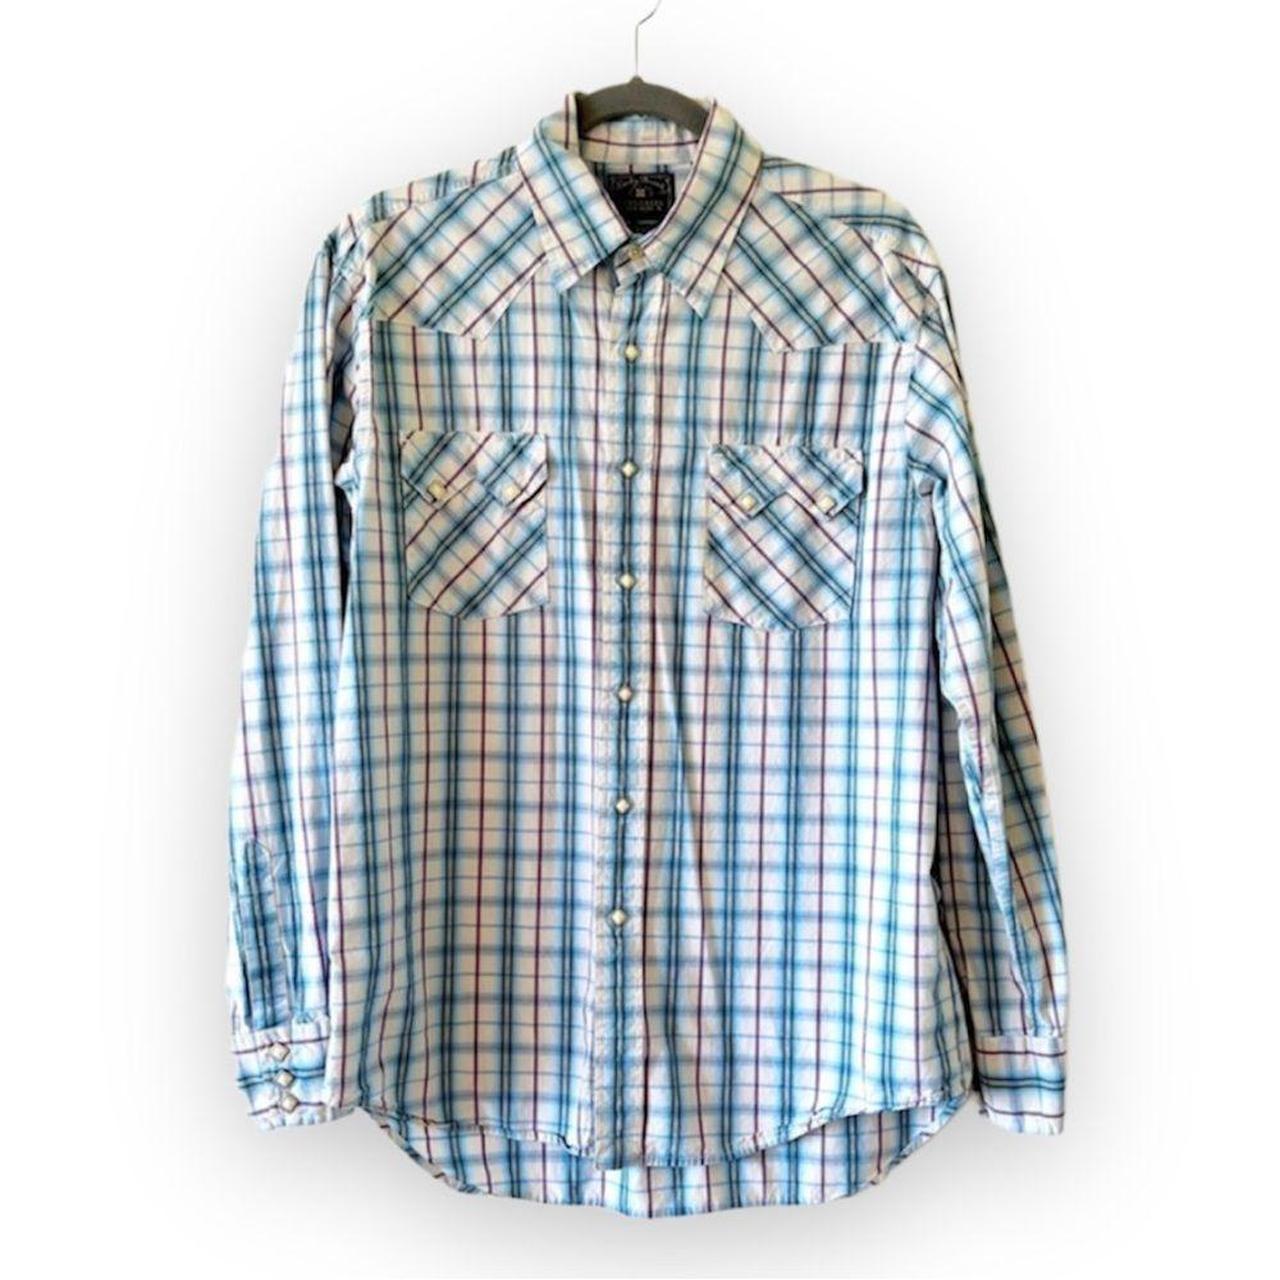 Western Shirt Has Been Hemmed for Women, Lucky Brand Cotton With